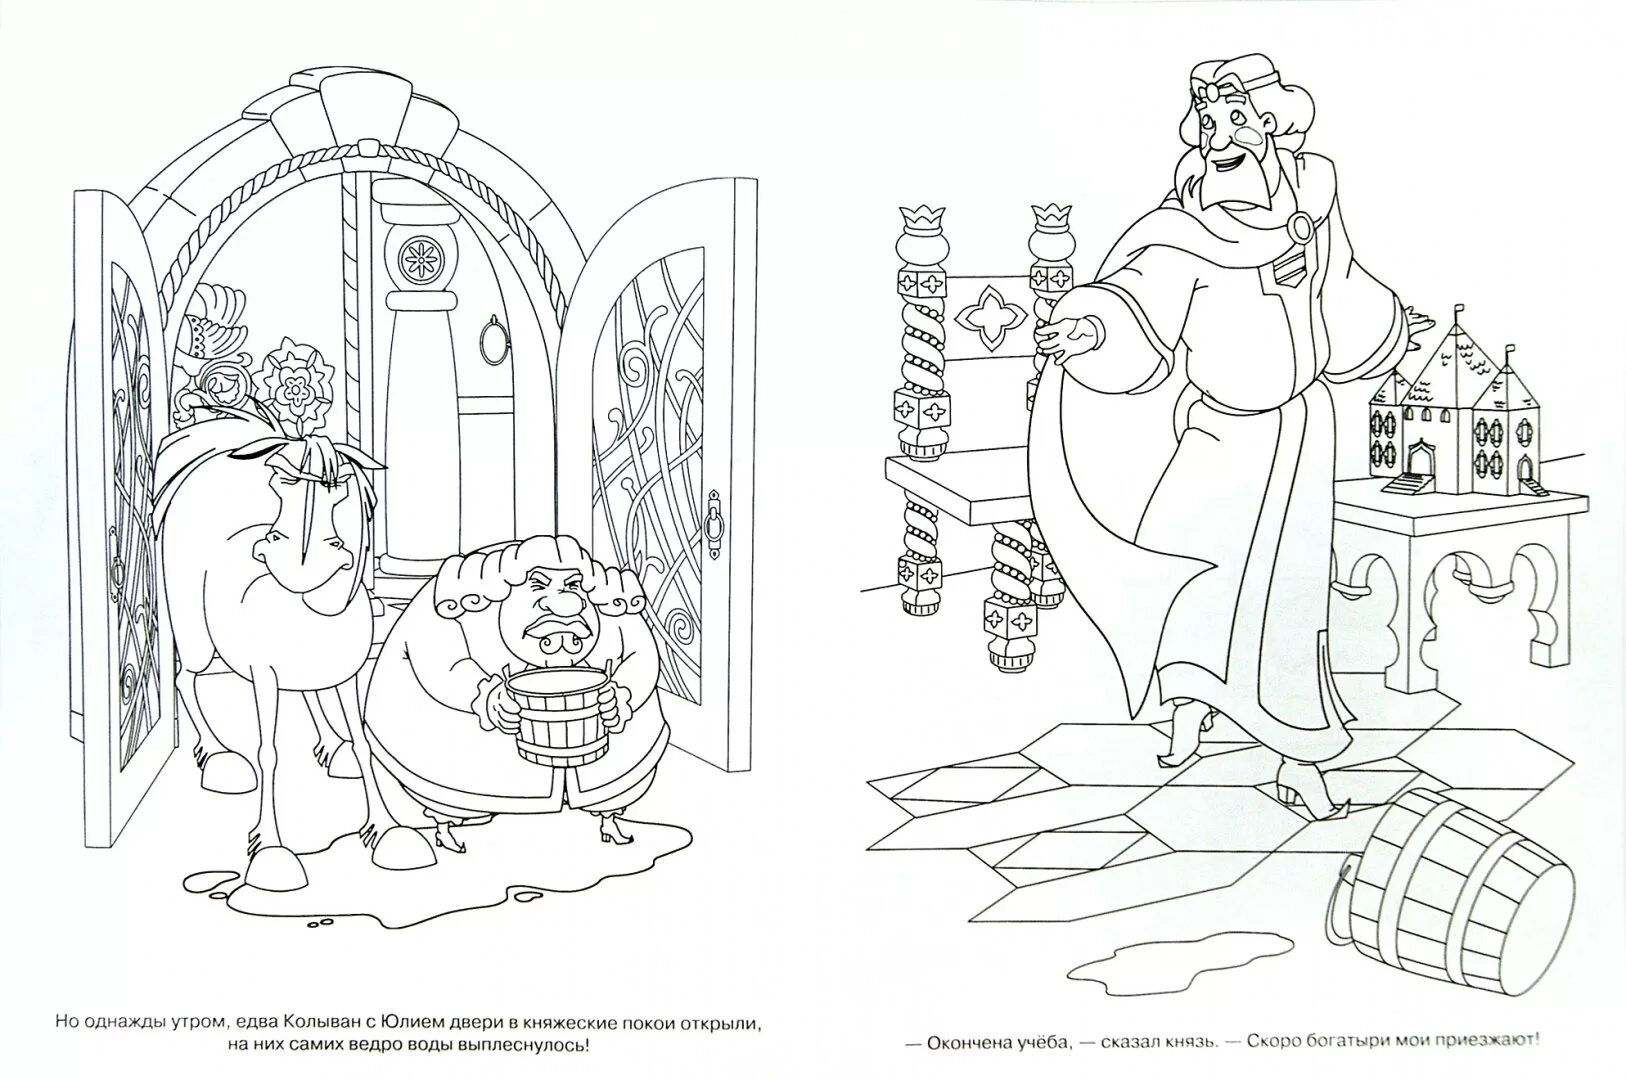 Unique coloring page 3 heroes game